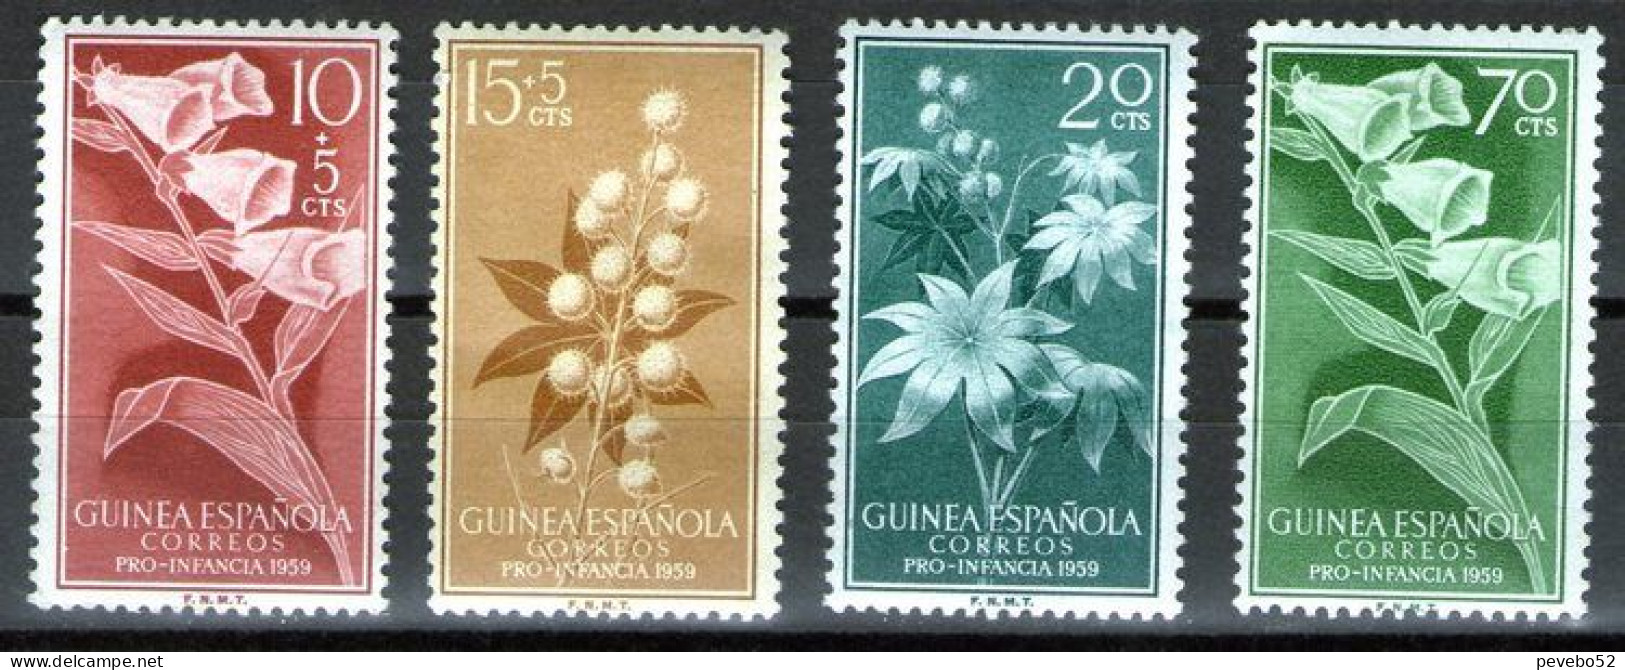 SPAINISH GUINEA 1959 - Charity Stamps - Flowering Plants MNH - Spanish Guinea